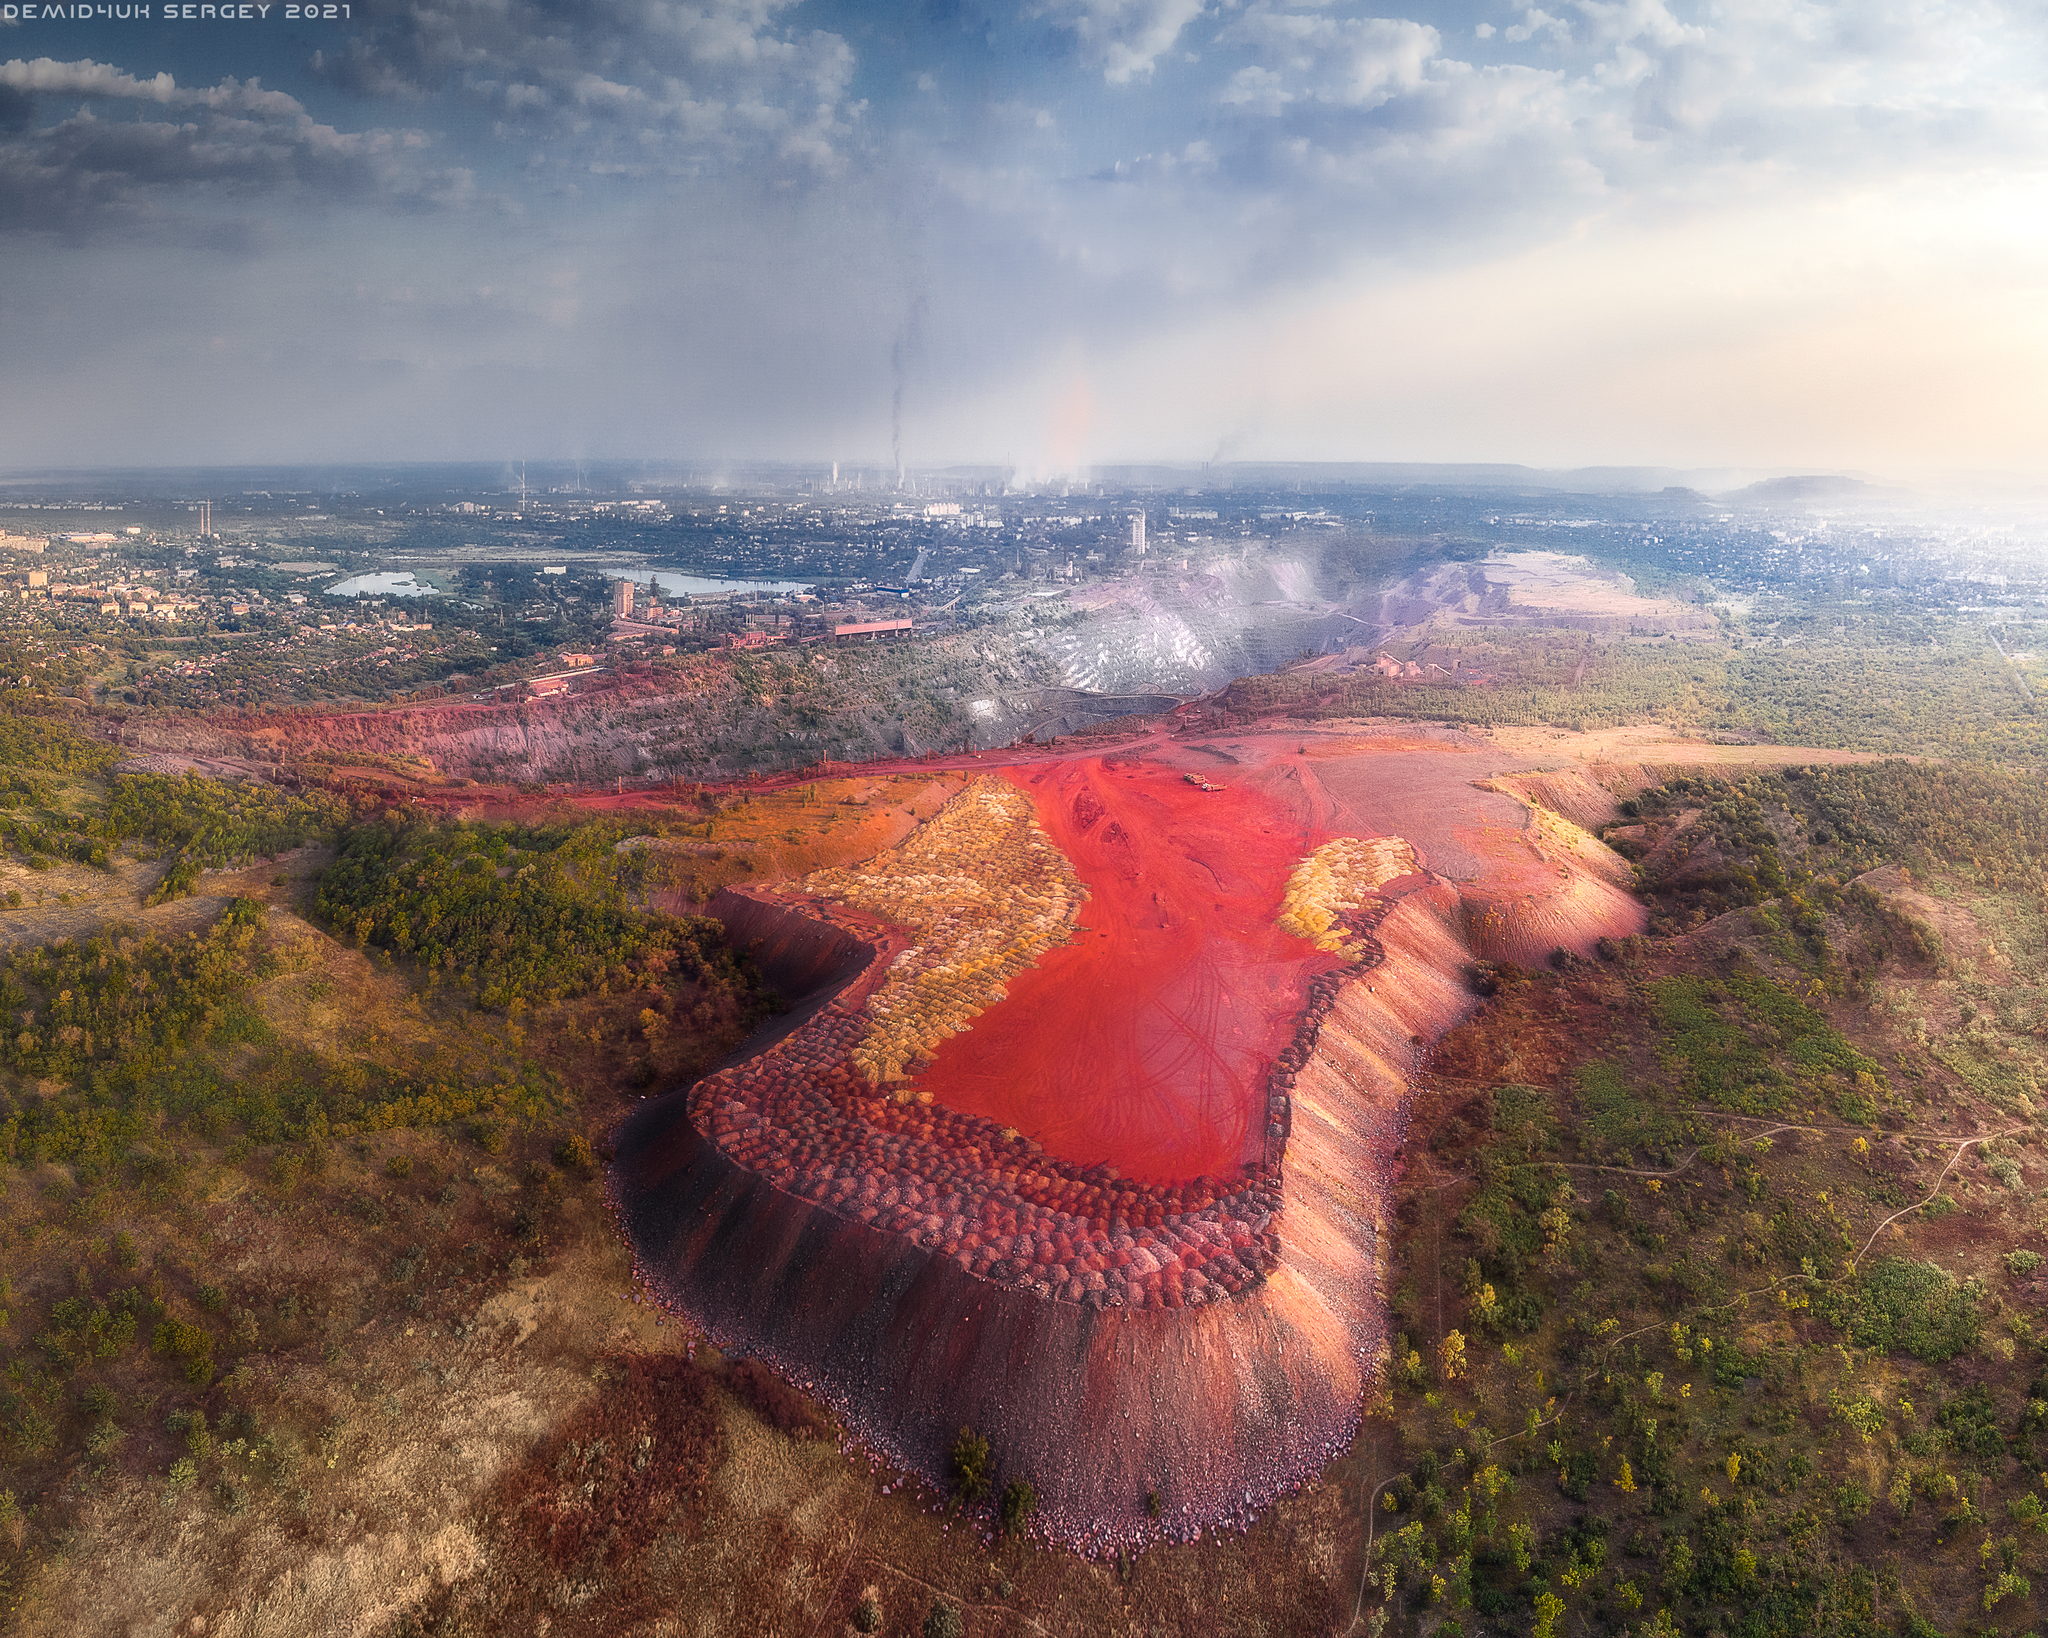 Blood of the Earth - My, The photo, Ore, Career, Landscape, Ecology, Wound, Dji, Krivoy Rog, Photoshop